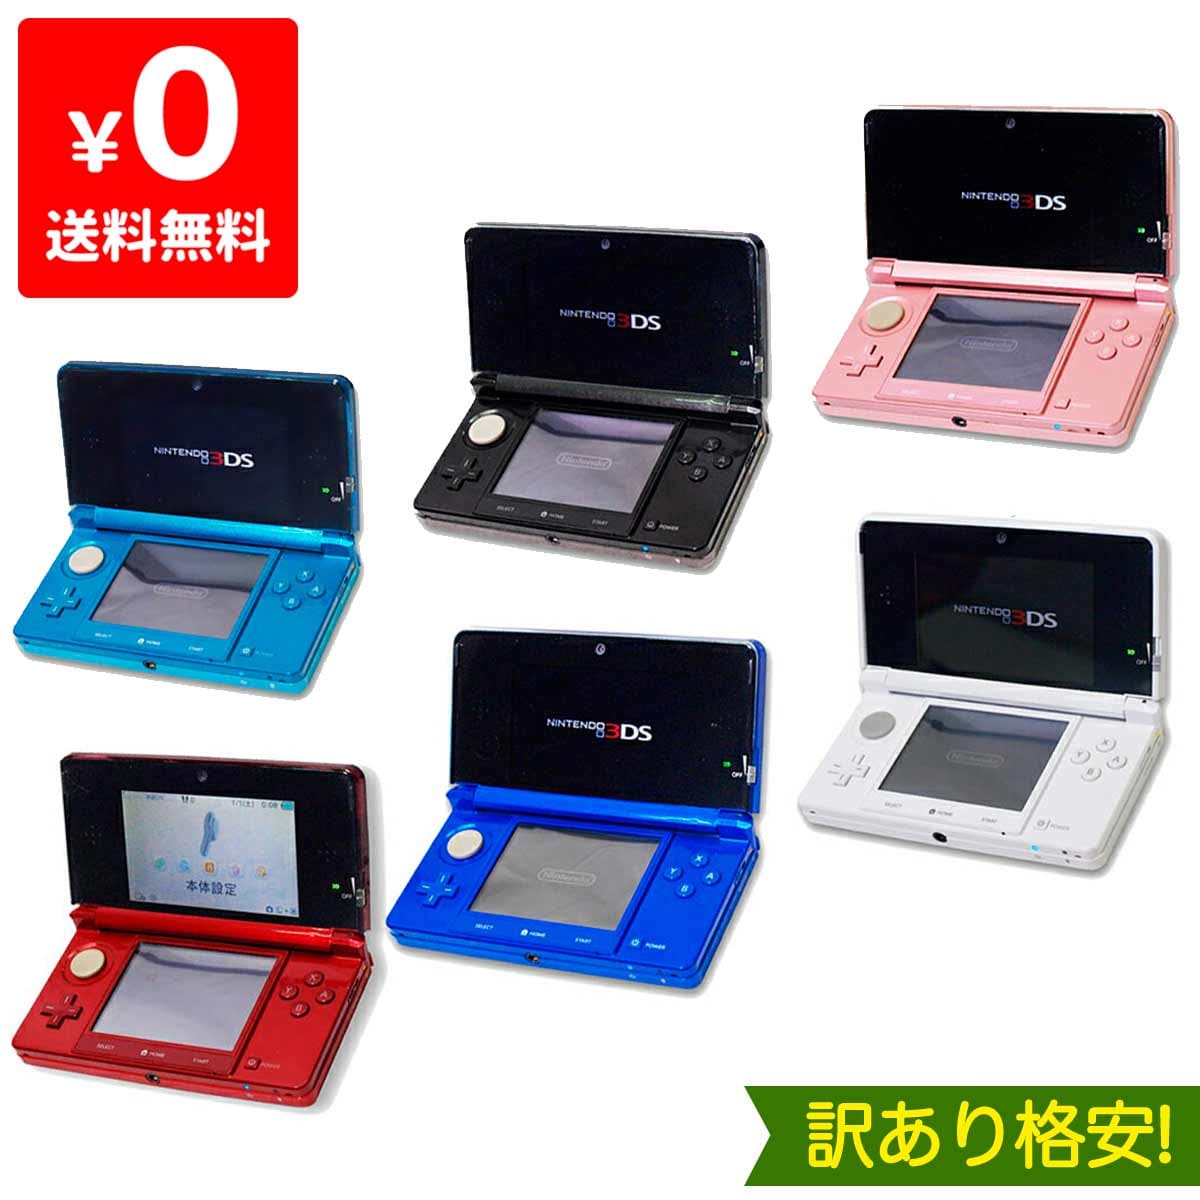 Used]The 3DS first generation random color Nintendo Nintendo game console -  BE FORWARD Store